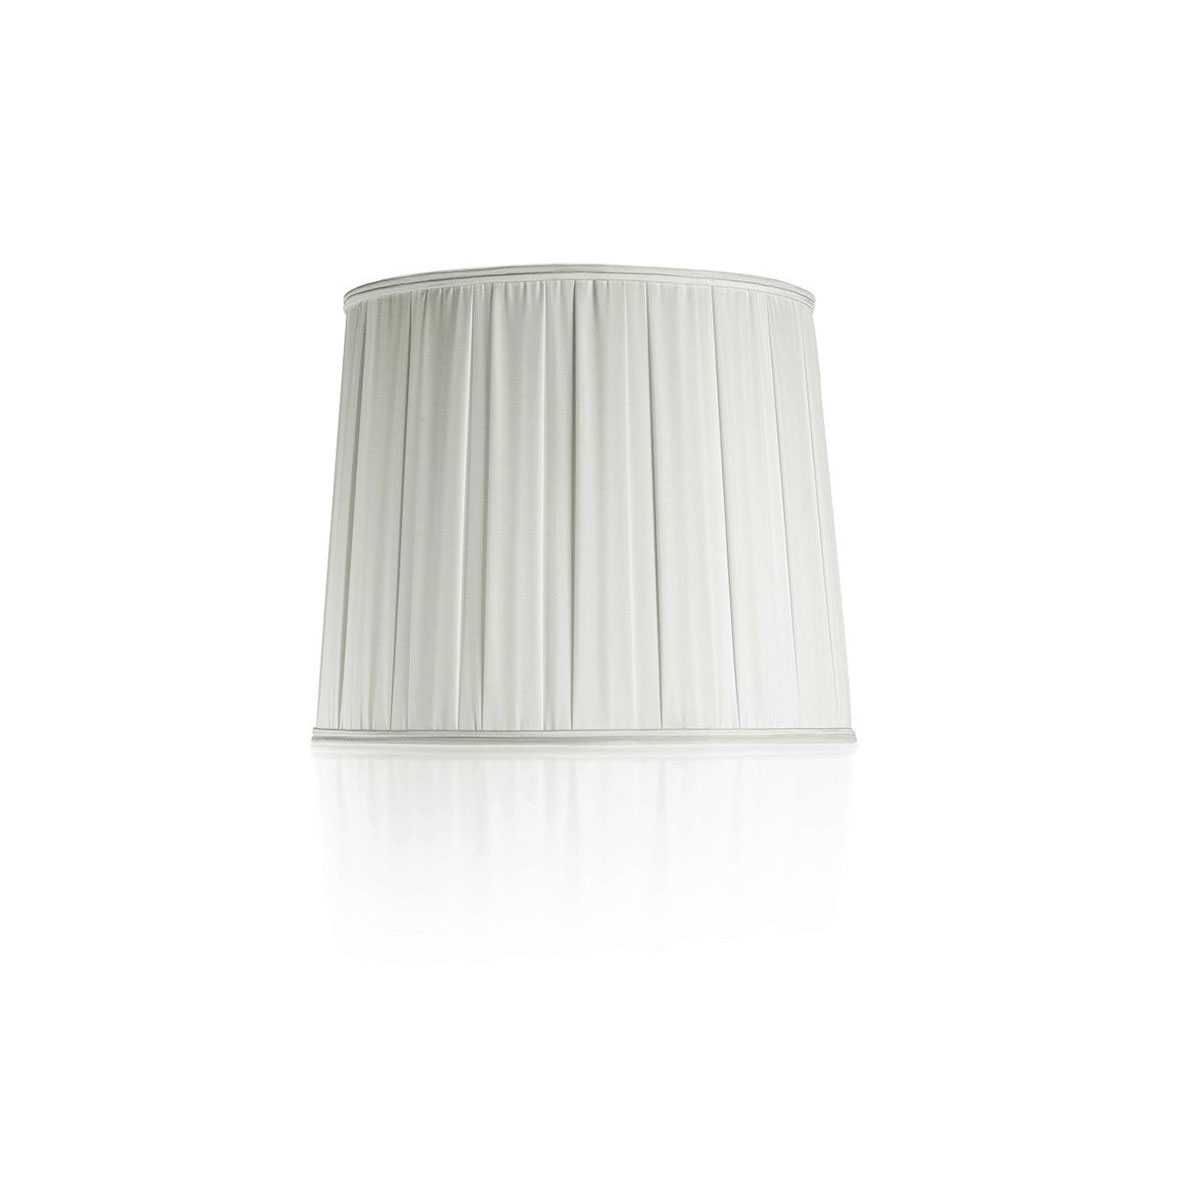 Baccarat Crystal, Krysta Pleated Crystal Lampshade, White